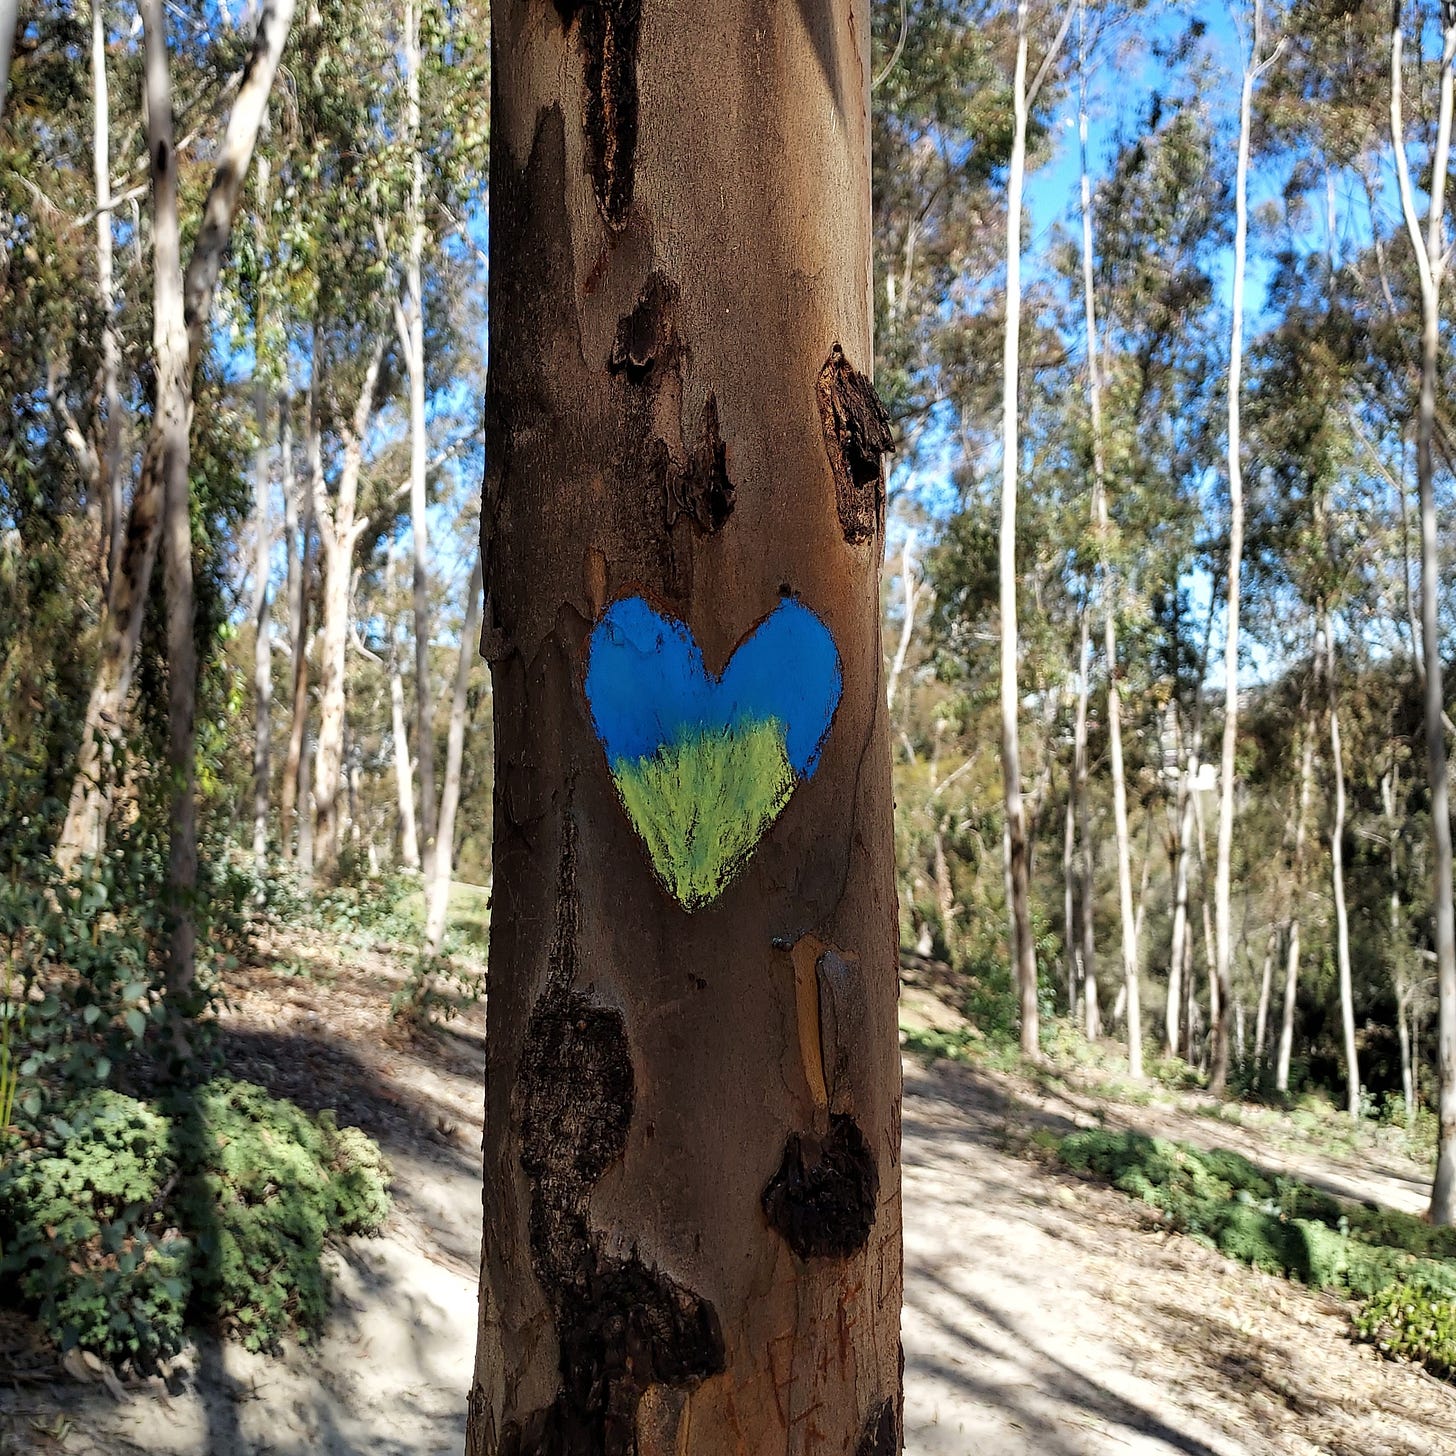 A close up of a blue and yellow heart drawn in chalk on the trunk of a eucalyptus tree representing love for Ukraine.